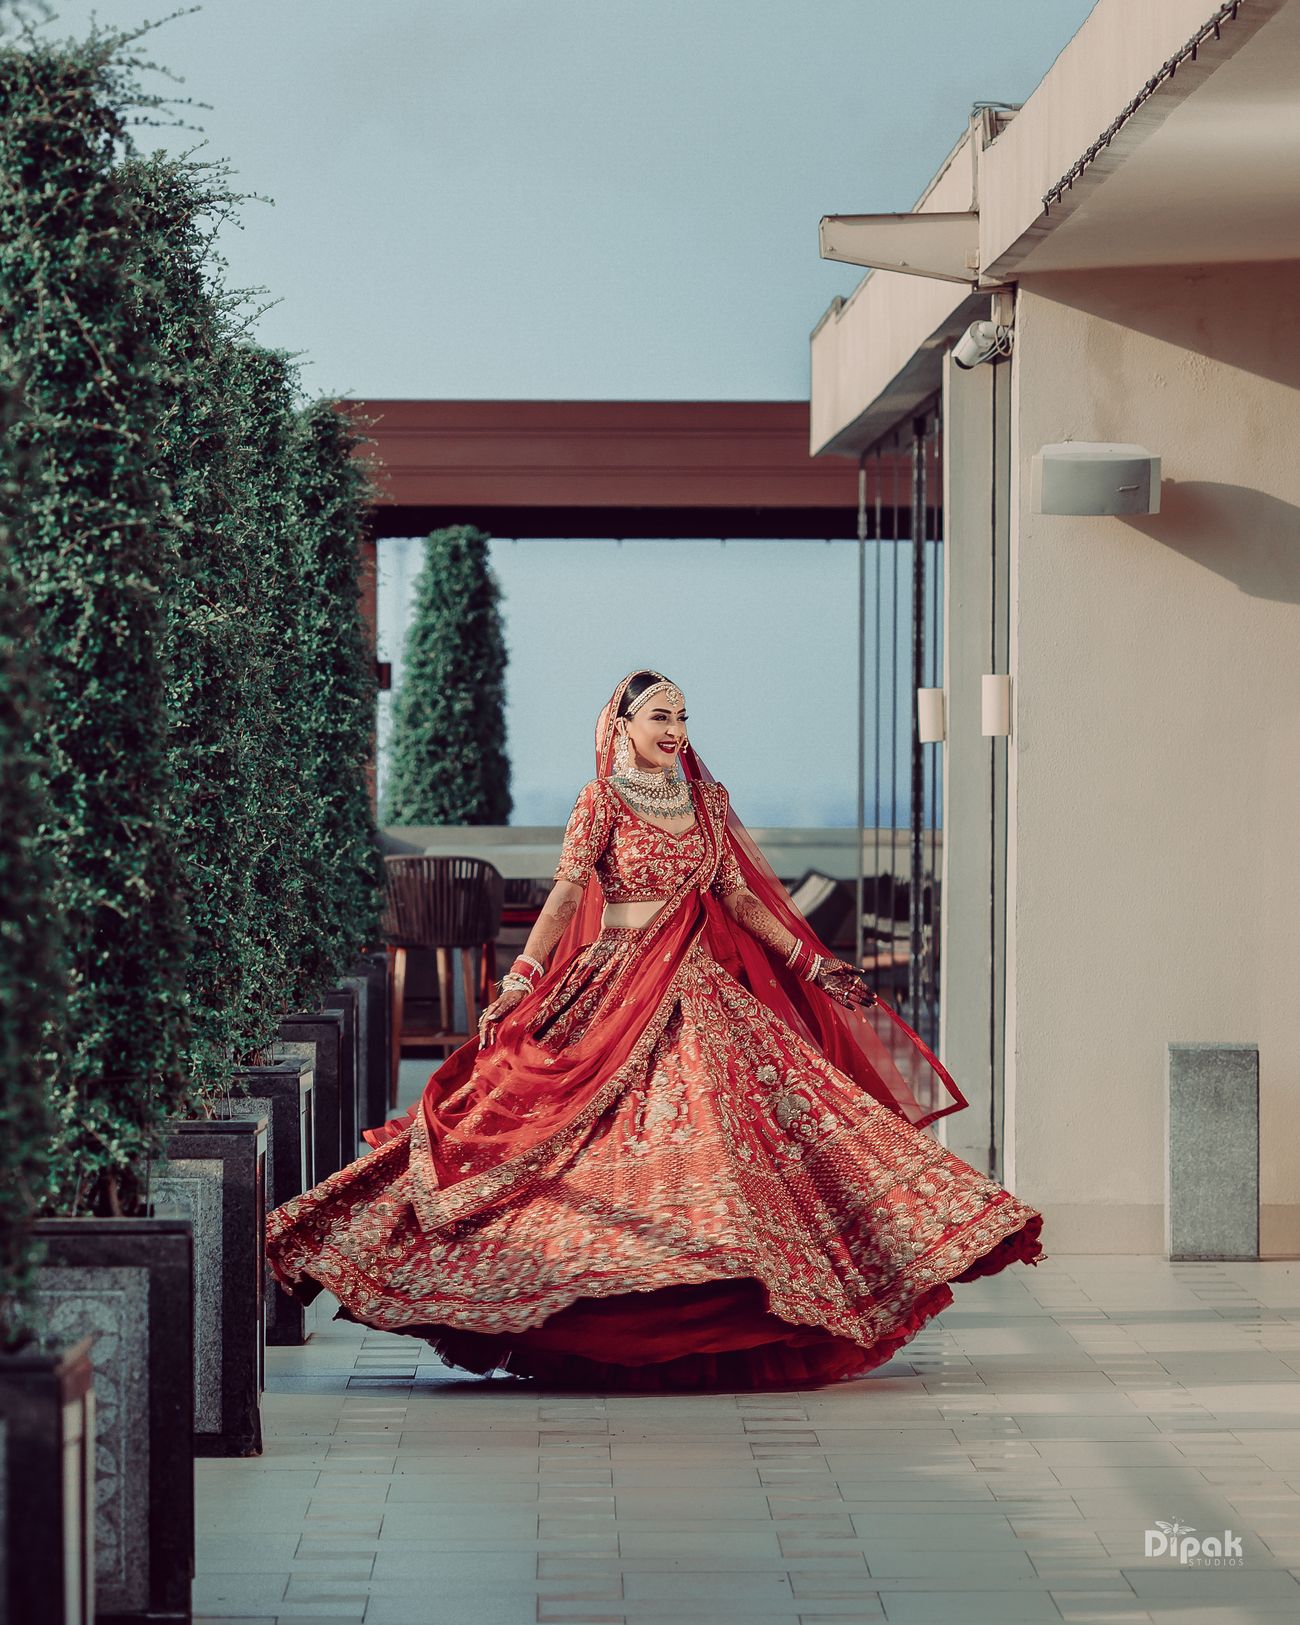 Fun Filled Delhi Wedding Where The Bride Designed All Outfits Herself ...